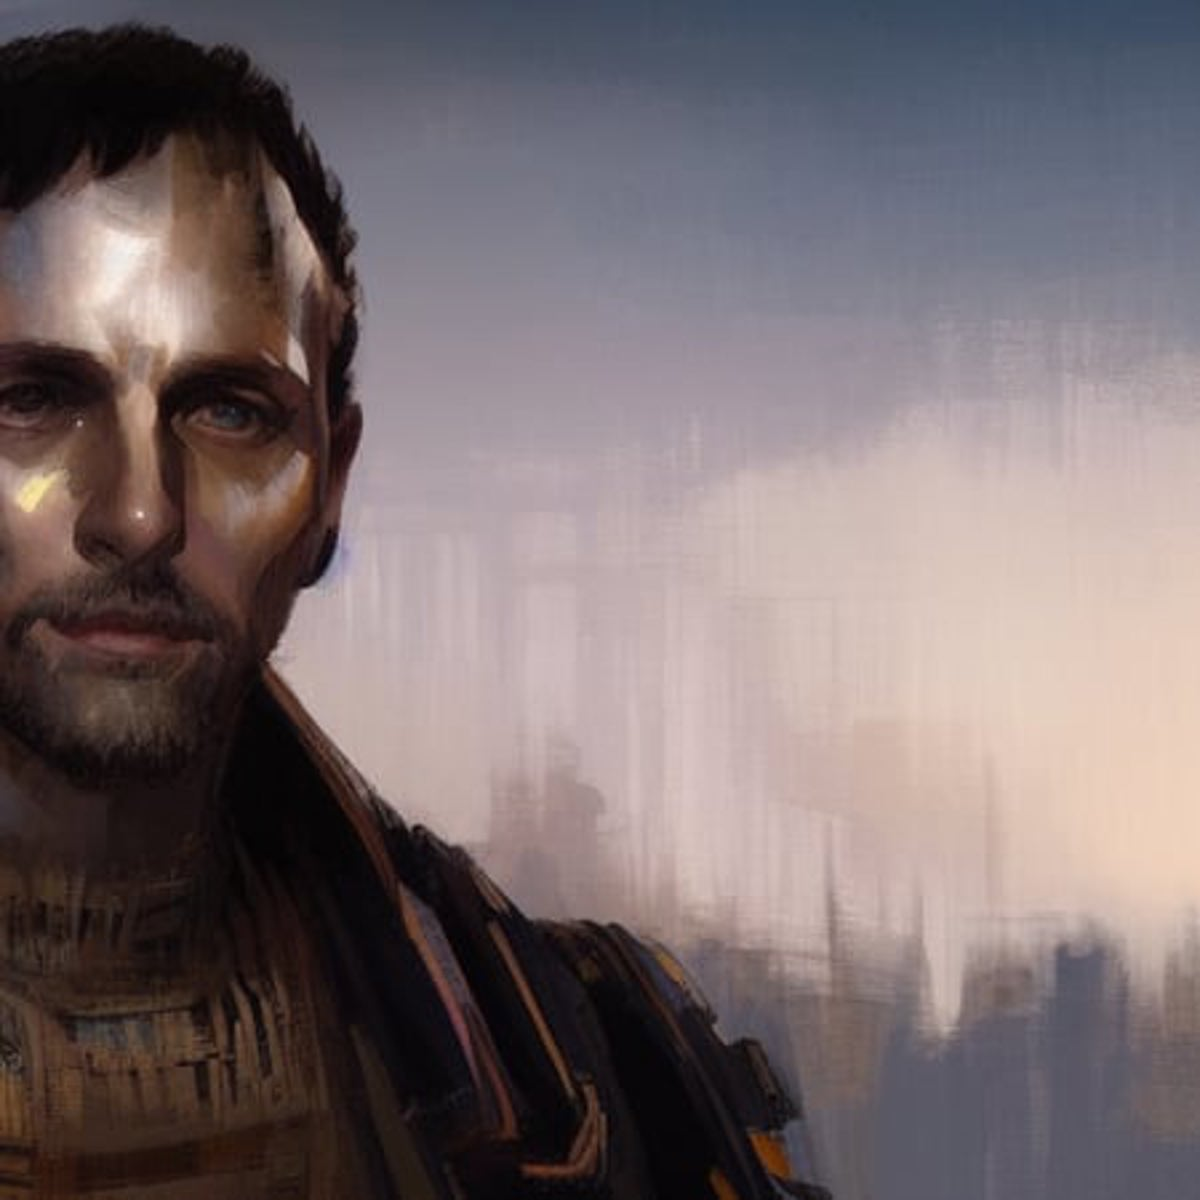 star citizen gameplay in style of disco elysium, Stable Diffusion